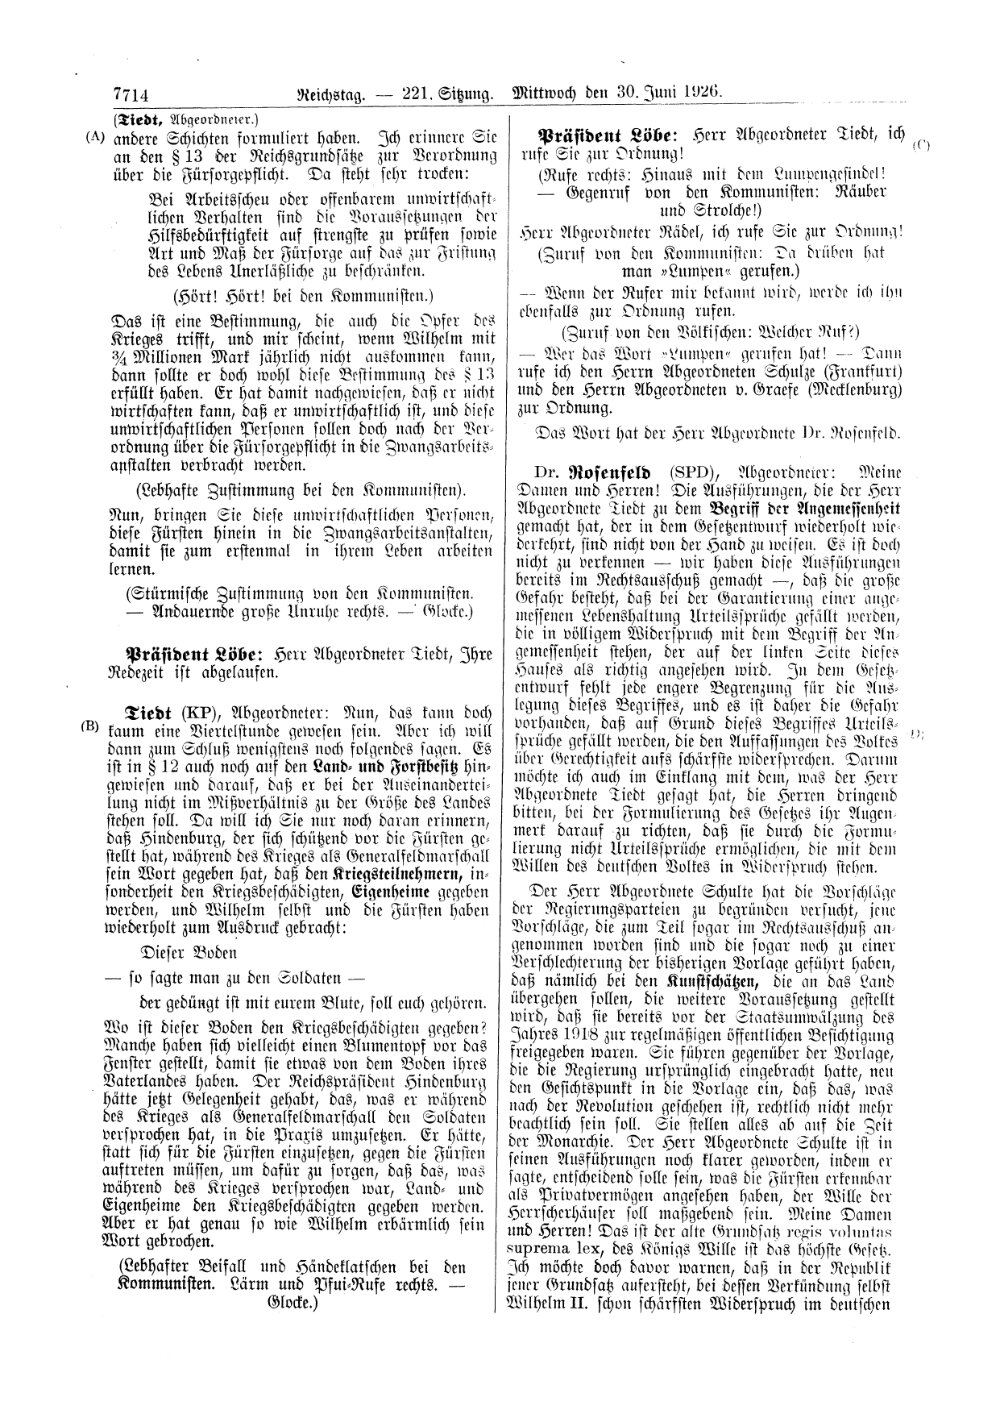 Scan of page 7714